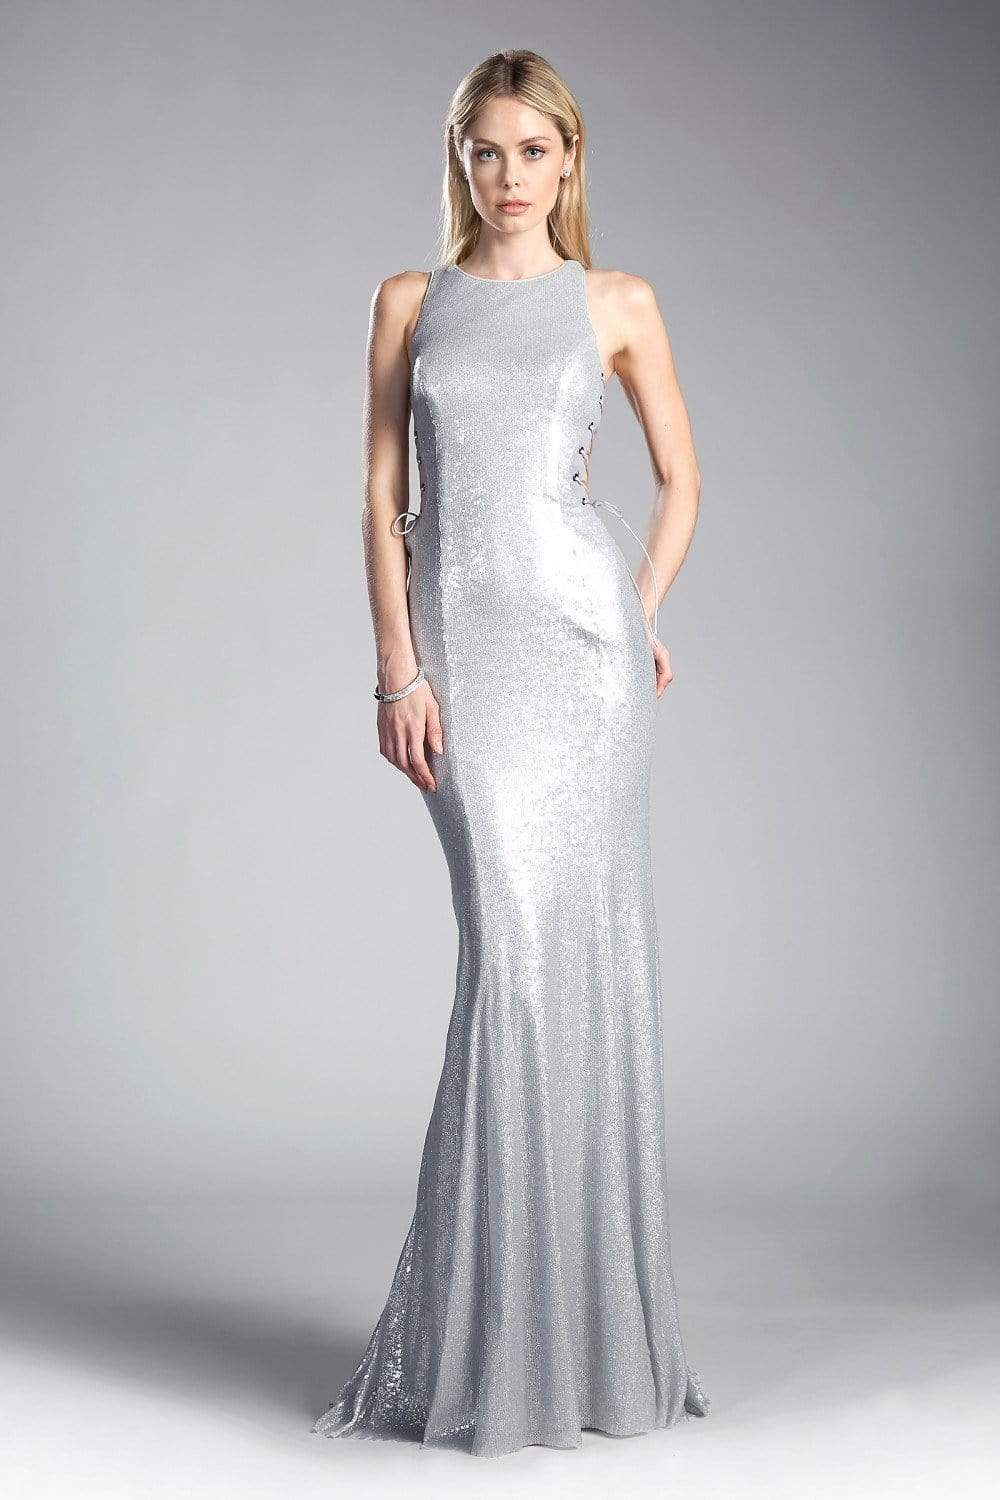 Cinderella Divine - Fitted Side Laced Up Evening Dress Special Occasion Dress 2 / Silver